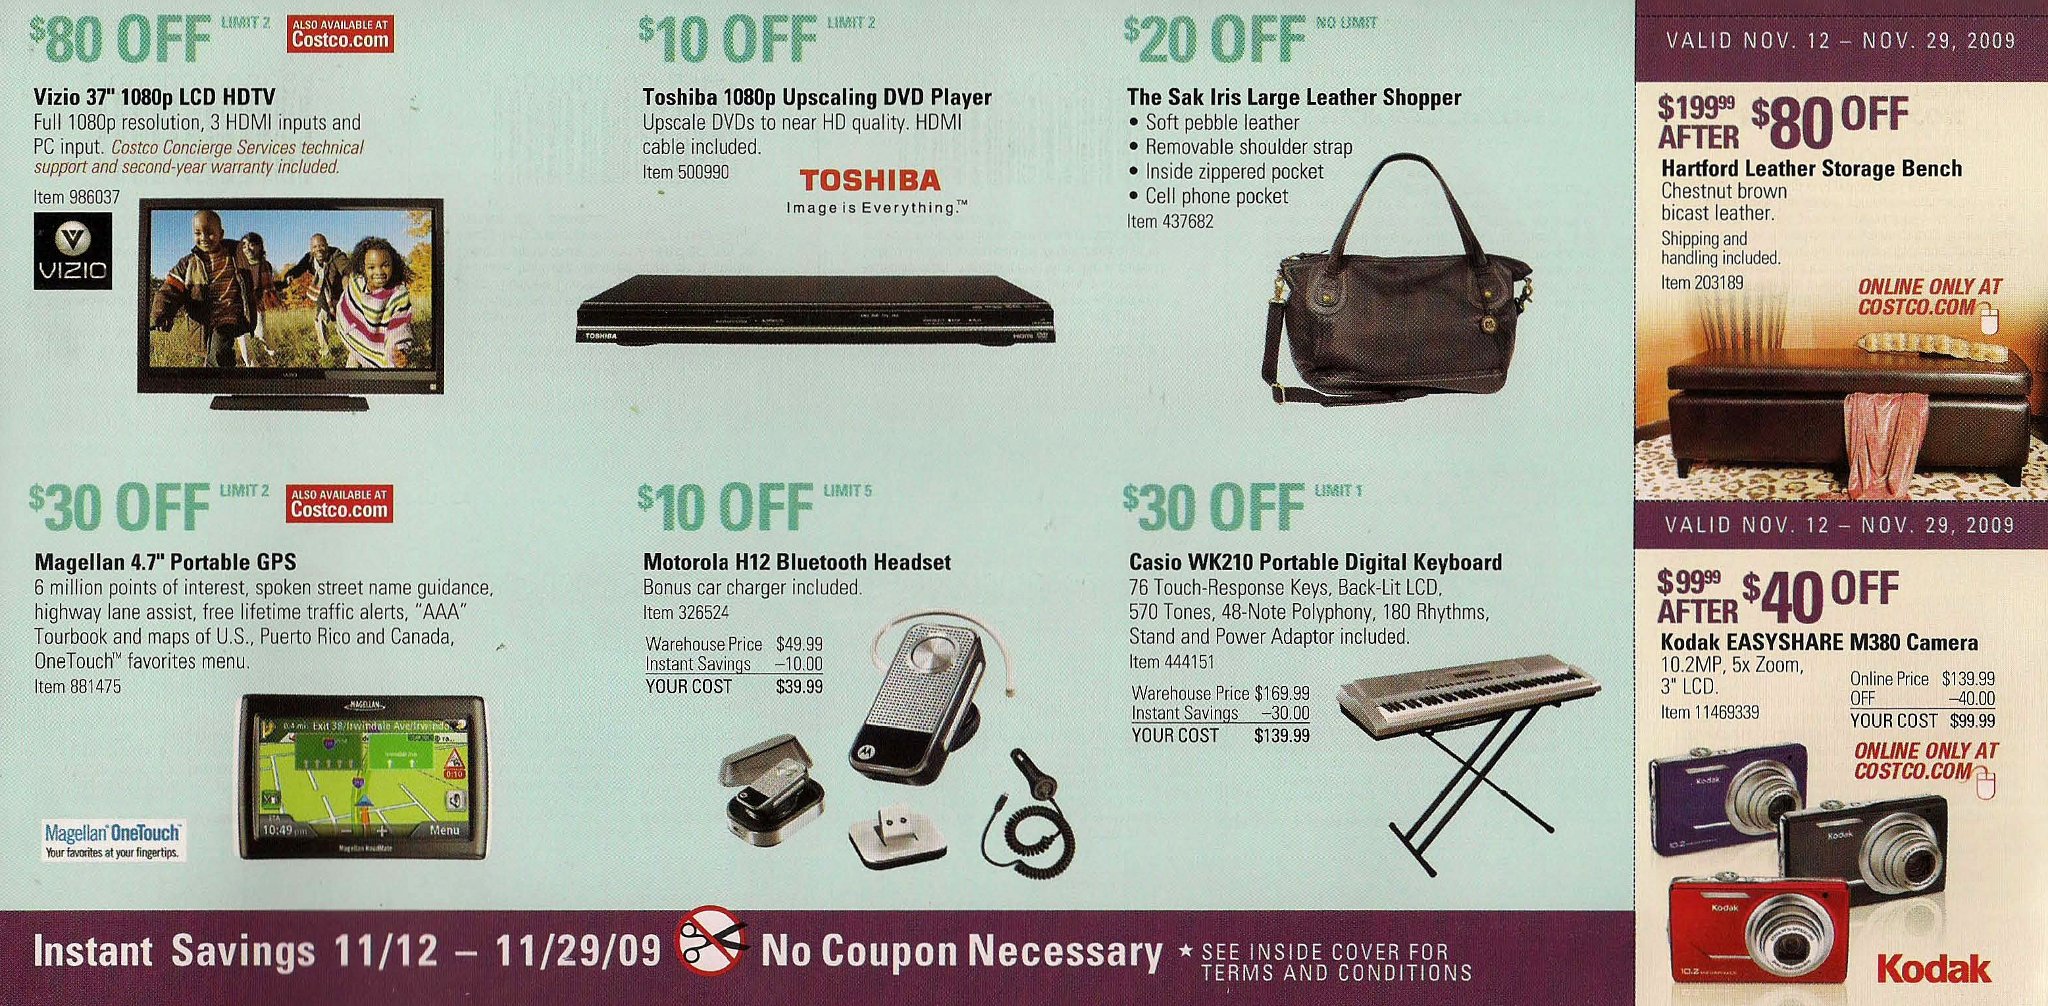 Coupon book page 9 in full-size.